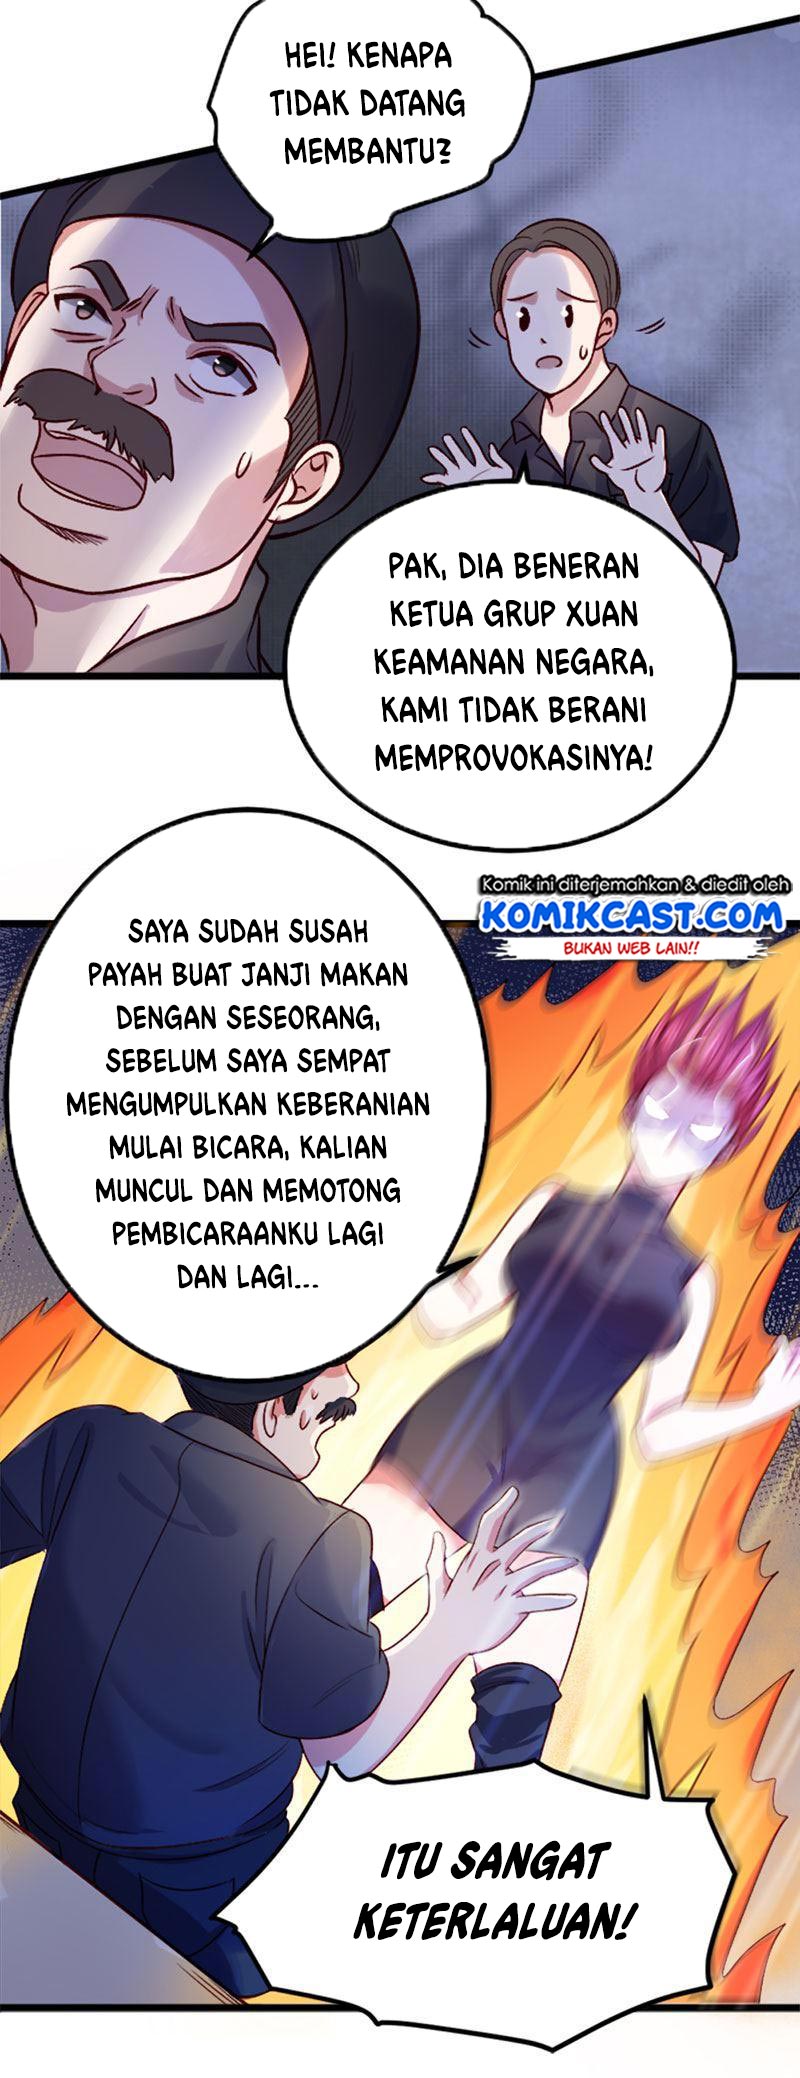 First Rate Master Chapter 74